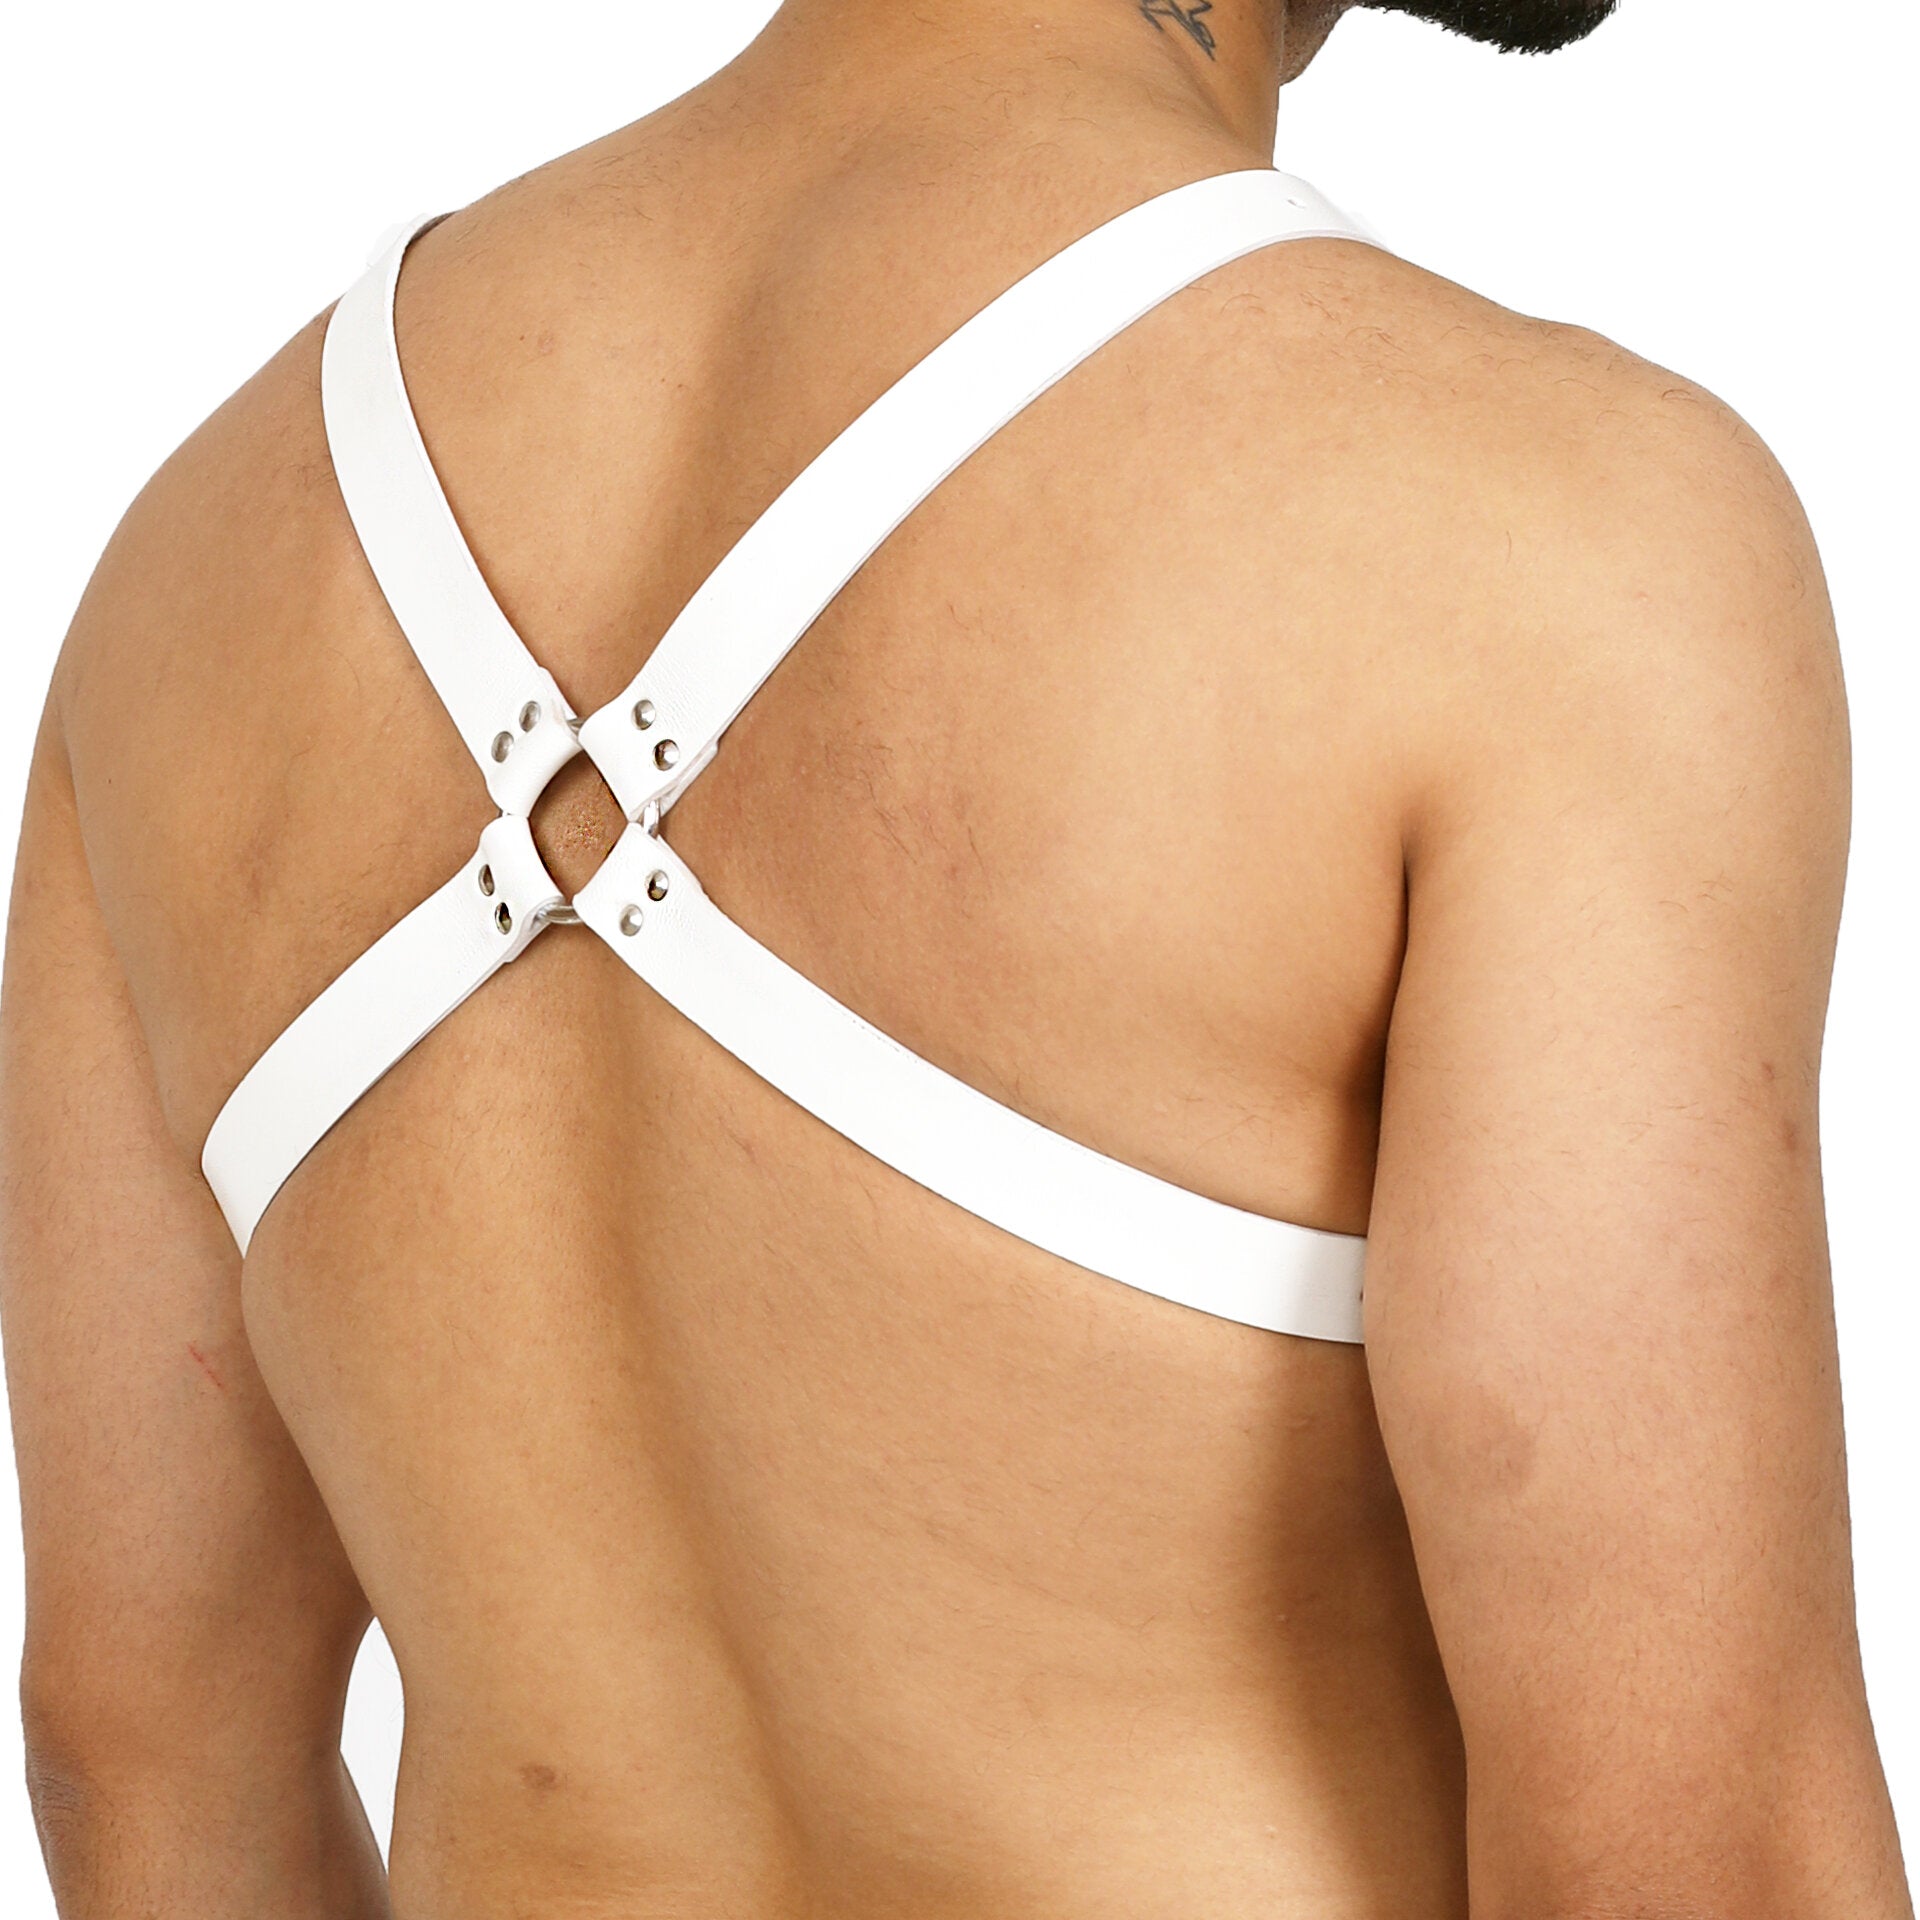 CLASSIC 'X' HARNESS - Subculture